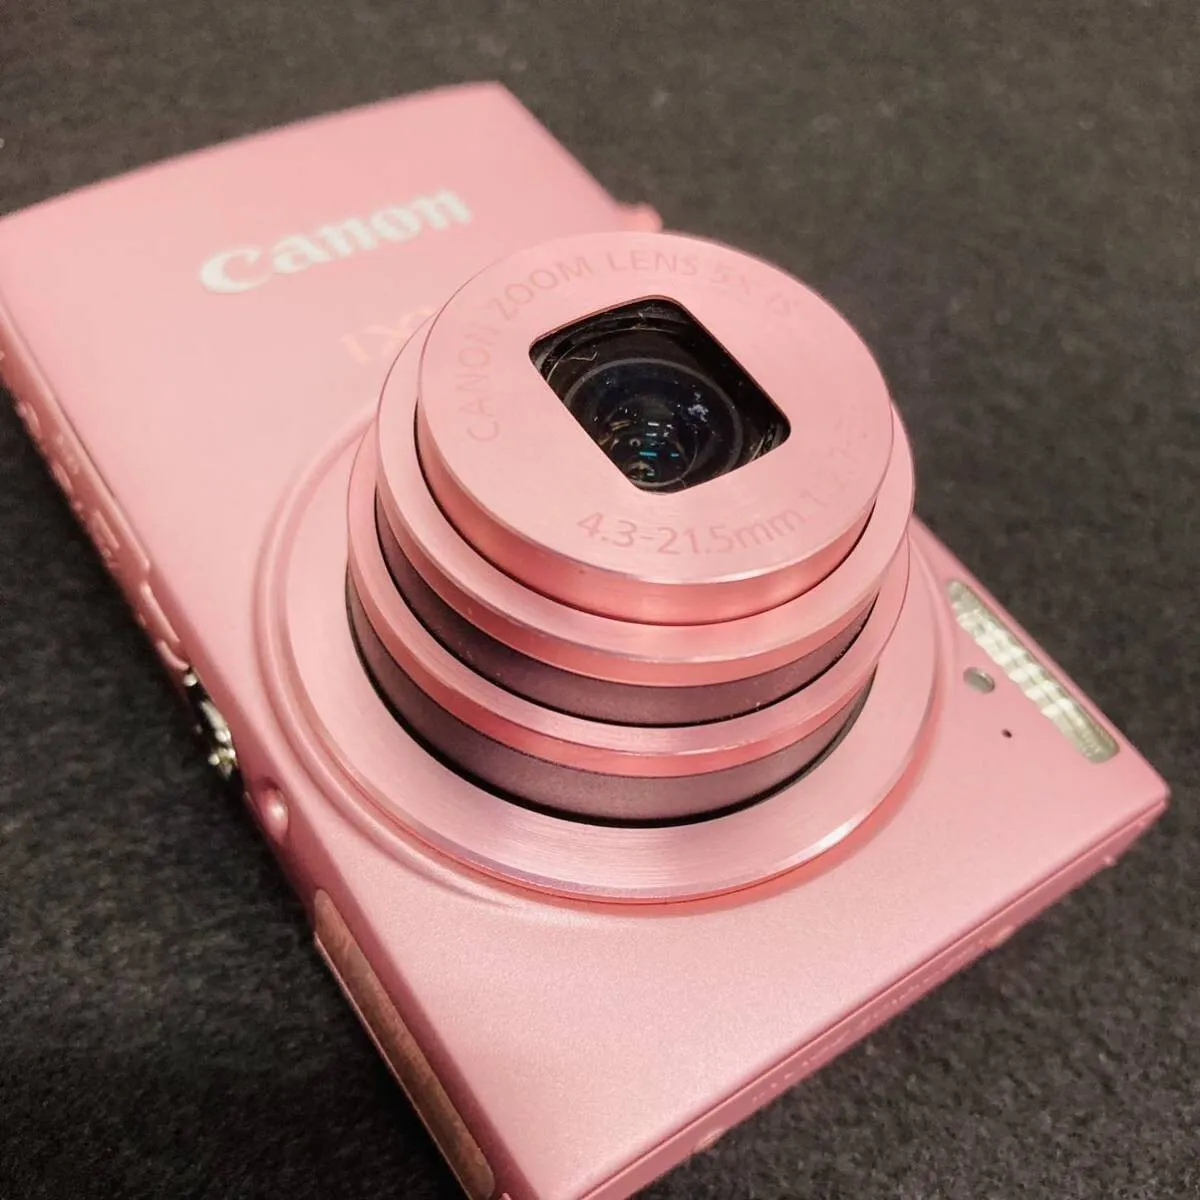 Canon Digital Camera IXY 420F PowerShot Pink 16.1MP From Japan Used